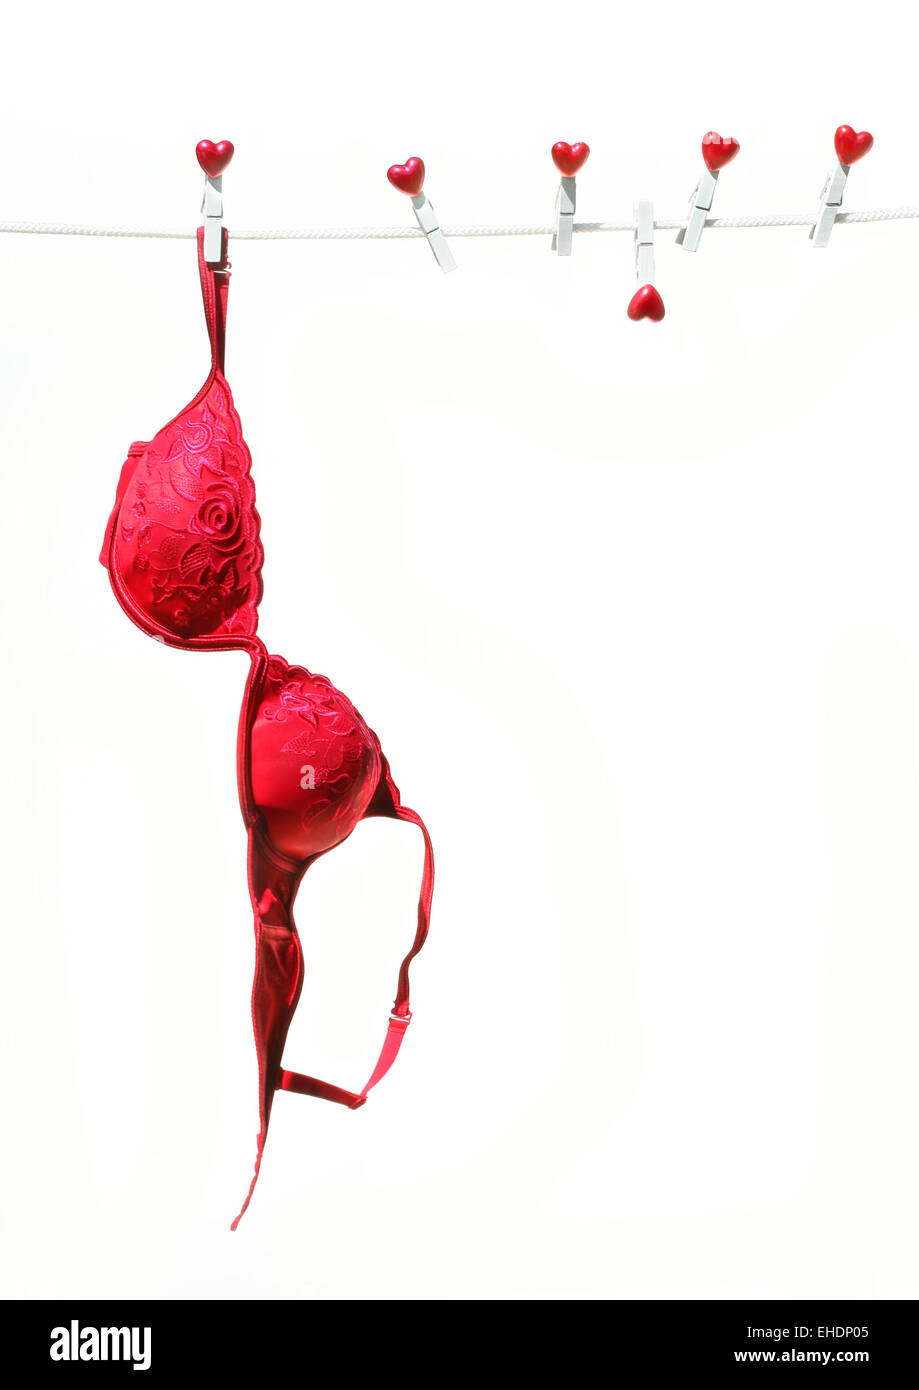 Red brassierre hanging on clothesline Stock Photo